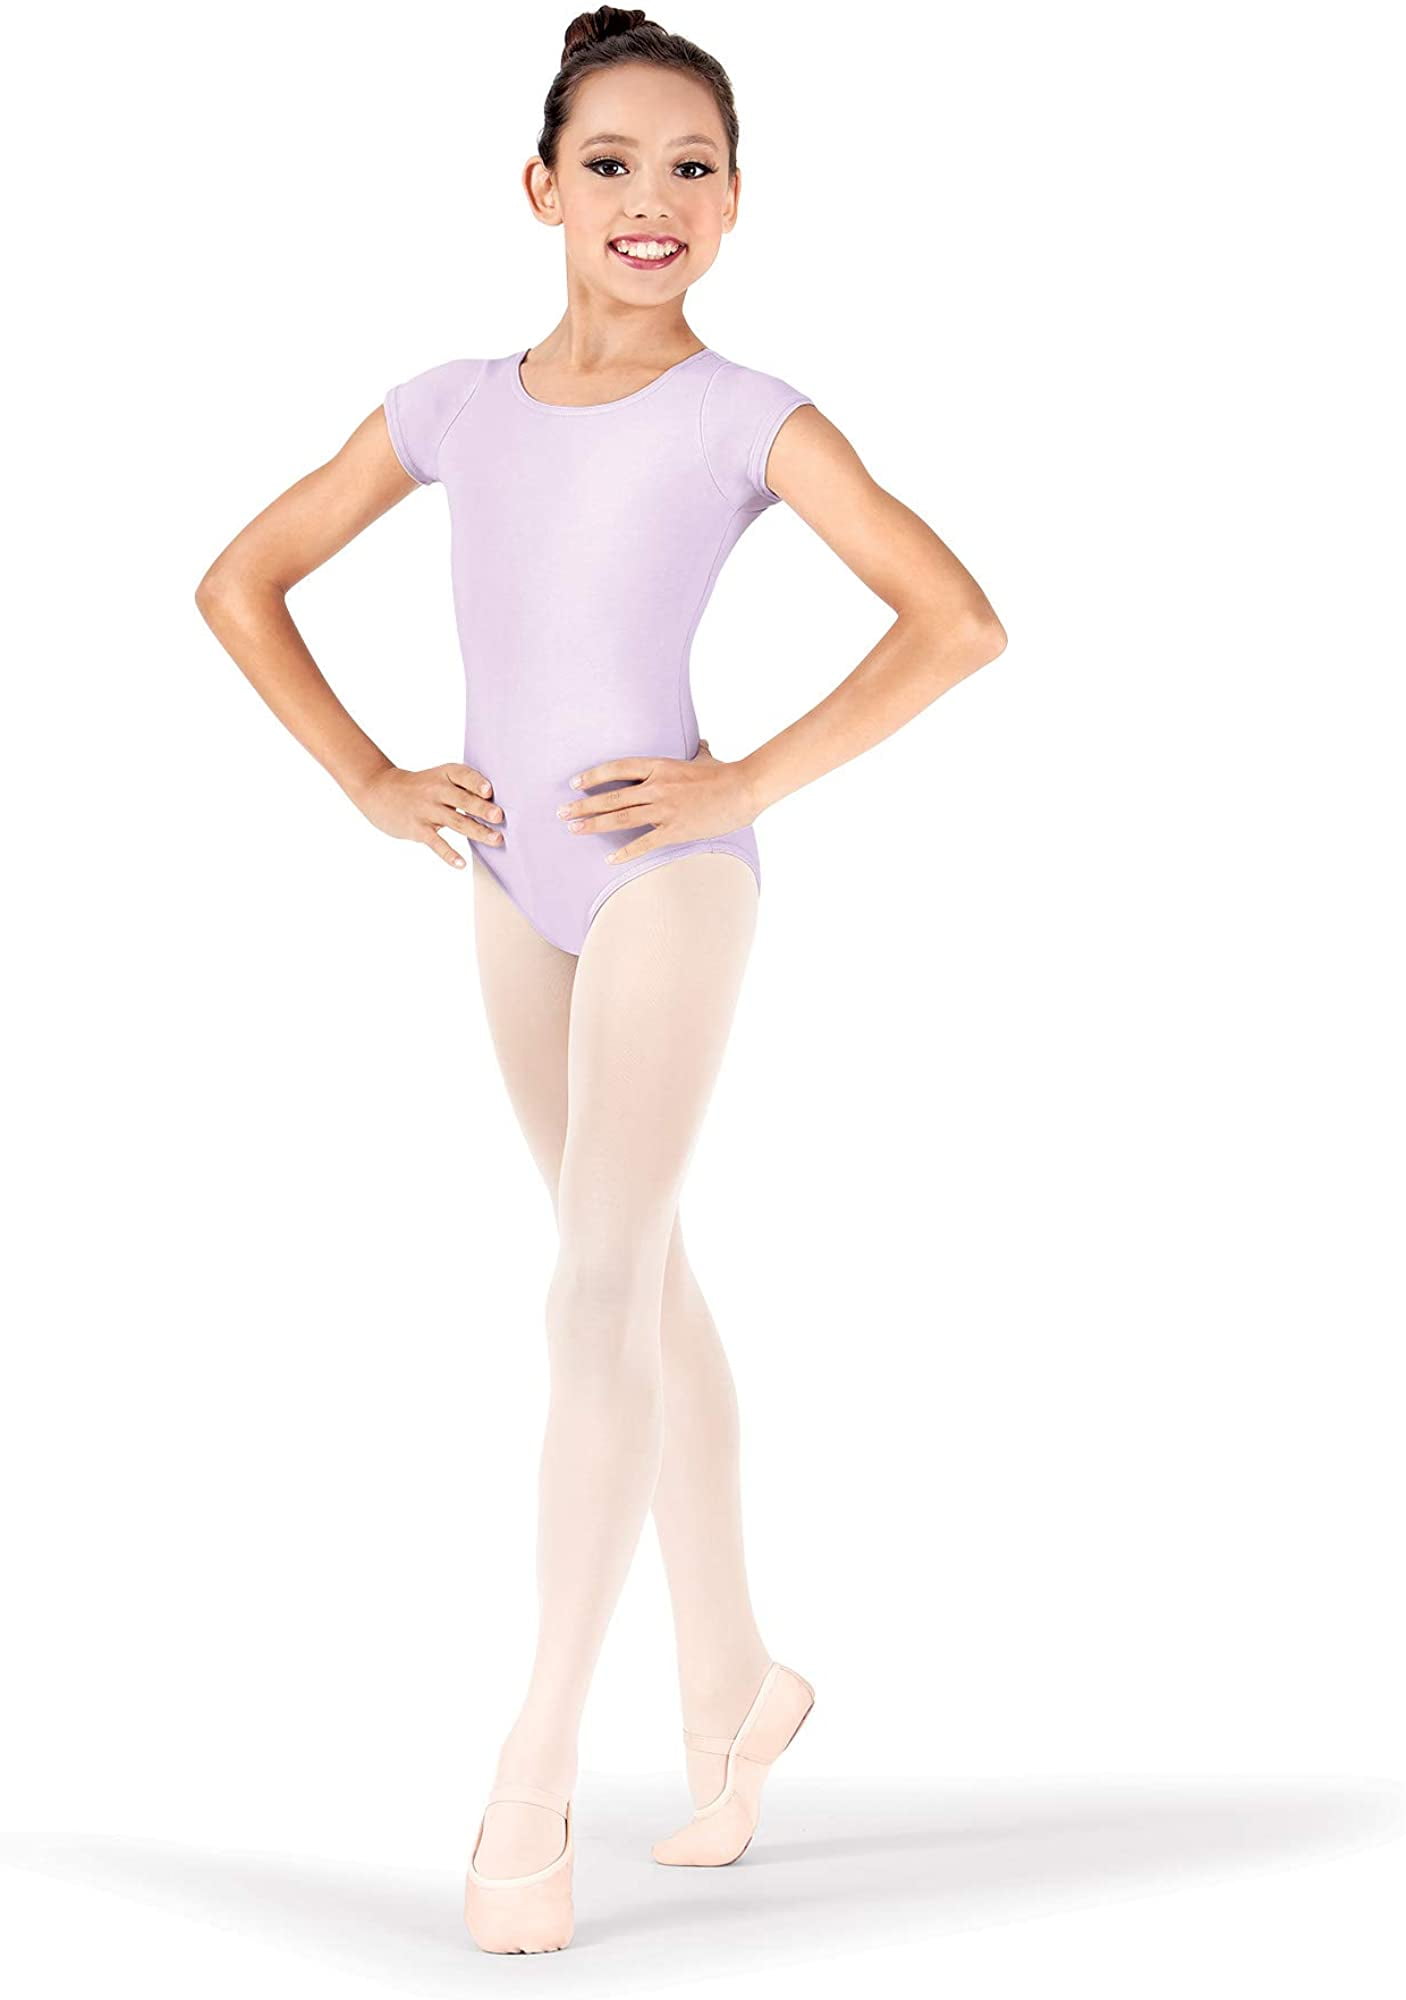 LEOTARD ONLY Evergreen Ballet Dance Costume Child Small & XS 